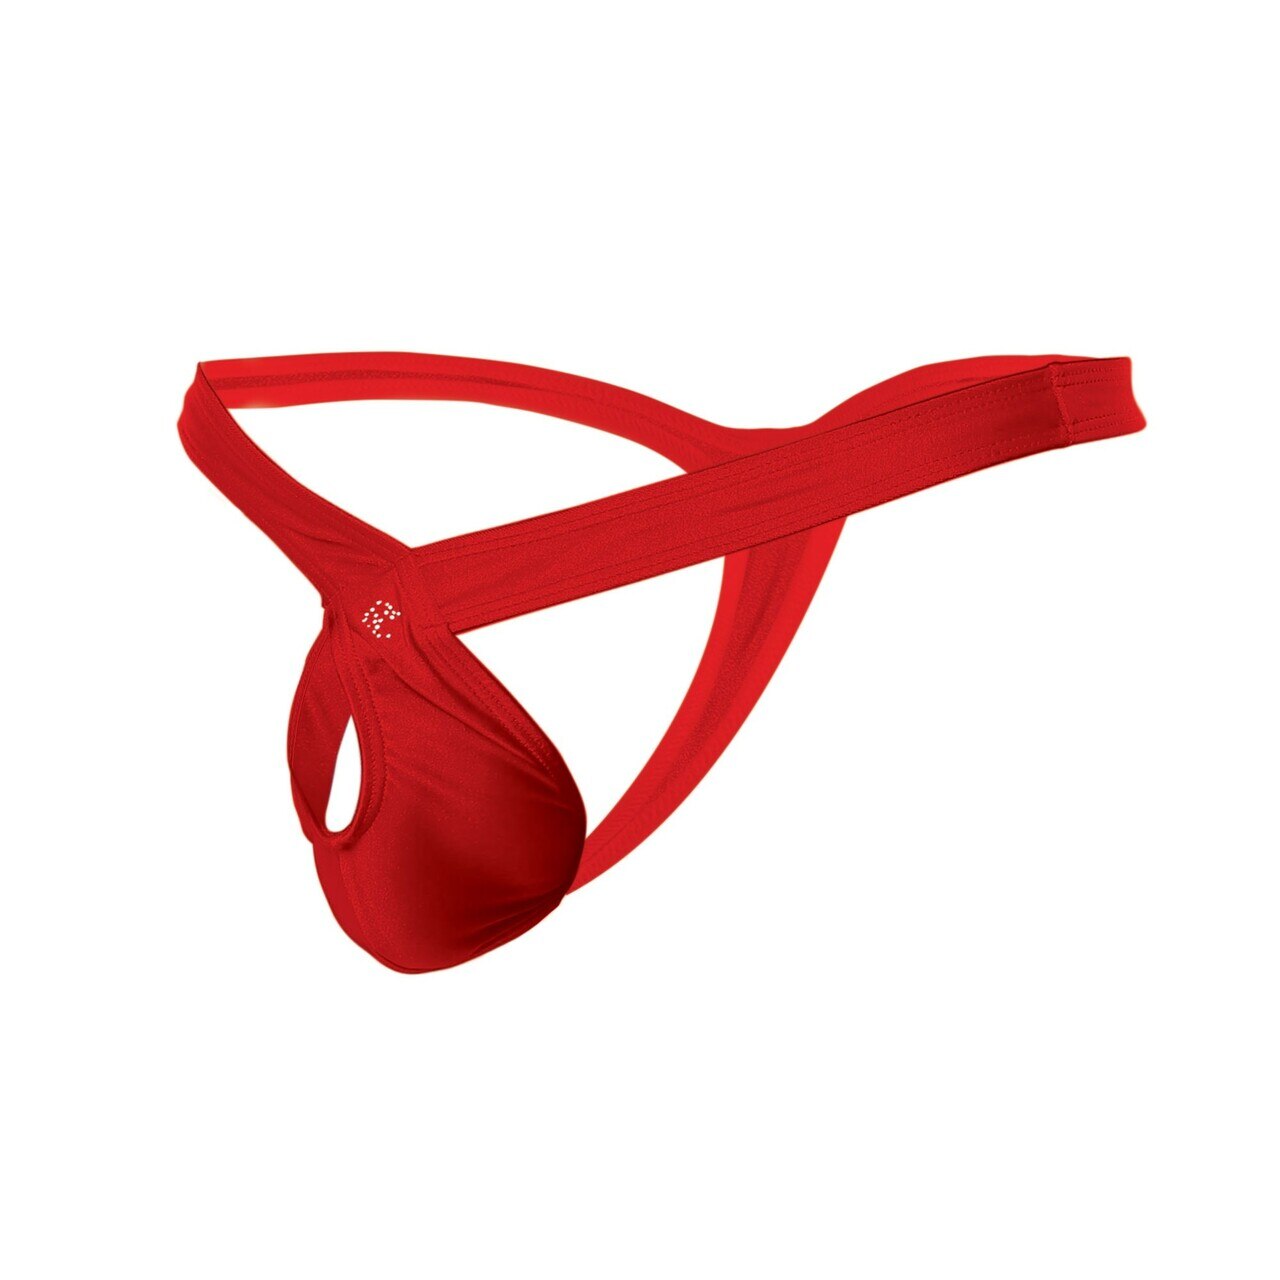 Mens Joe Snyder Infinity Hole Thong Red